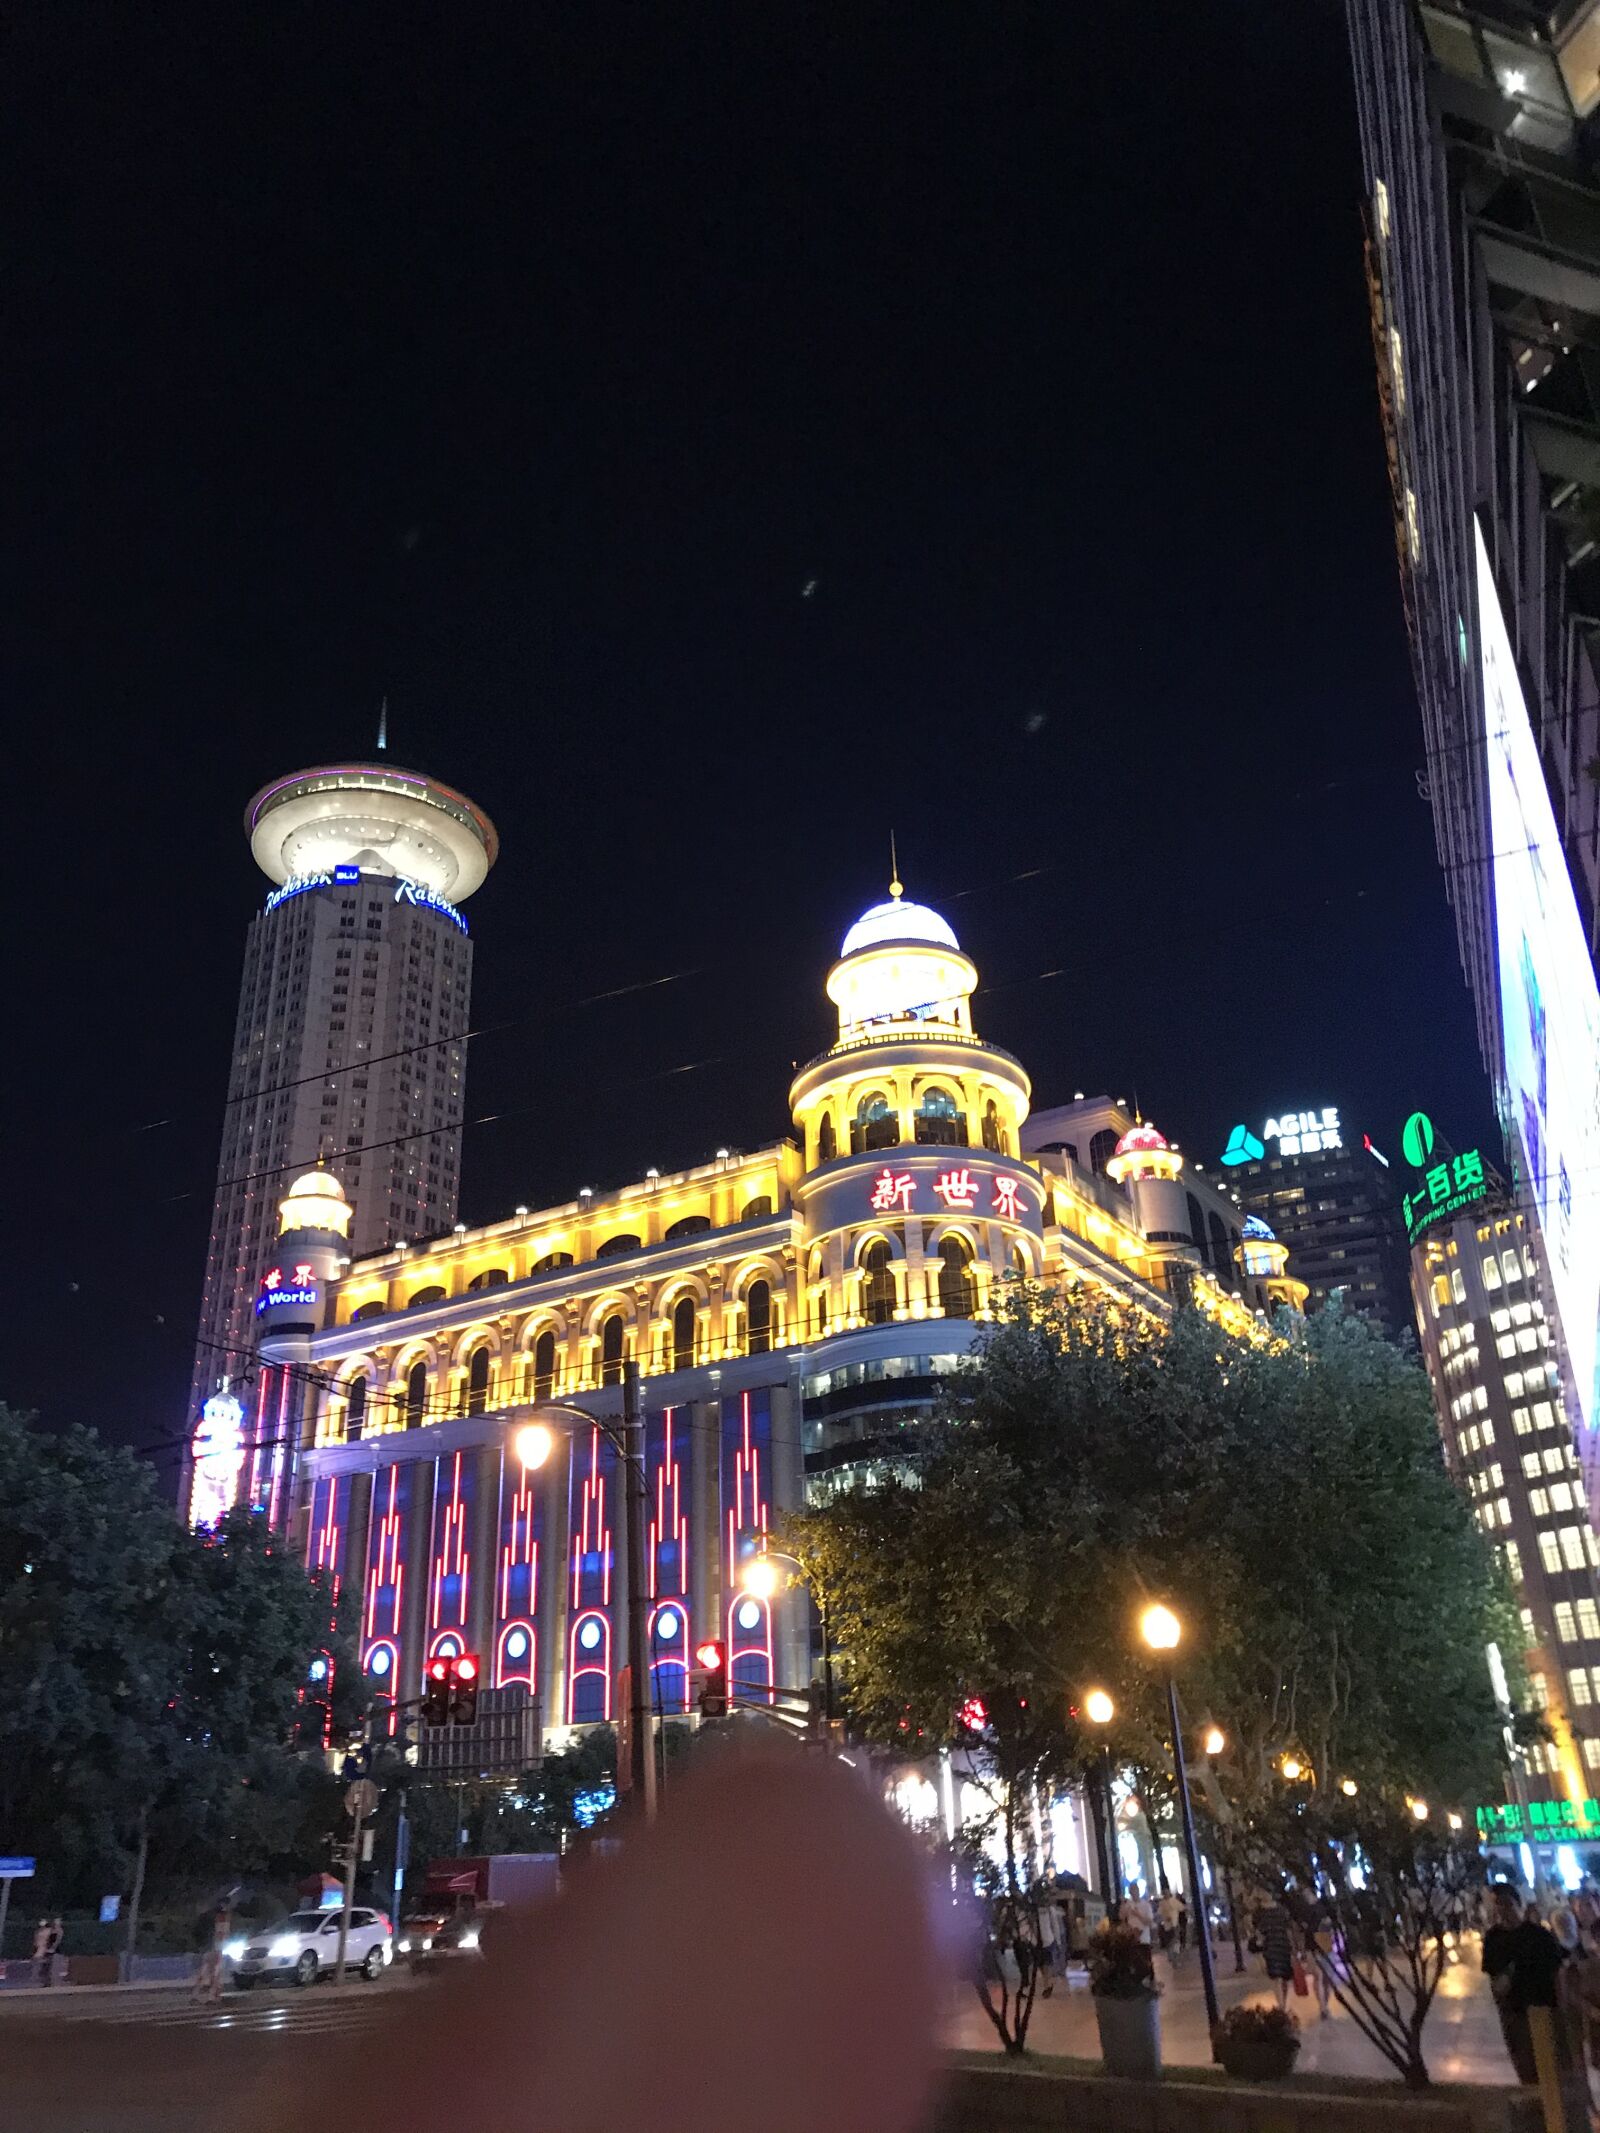 iPhone 7 Plus back dual camera 3.99mm f/1.8 sample photo. People's square, night, shanghai photography